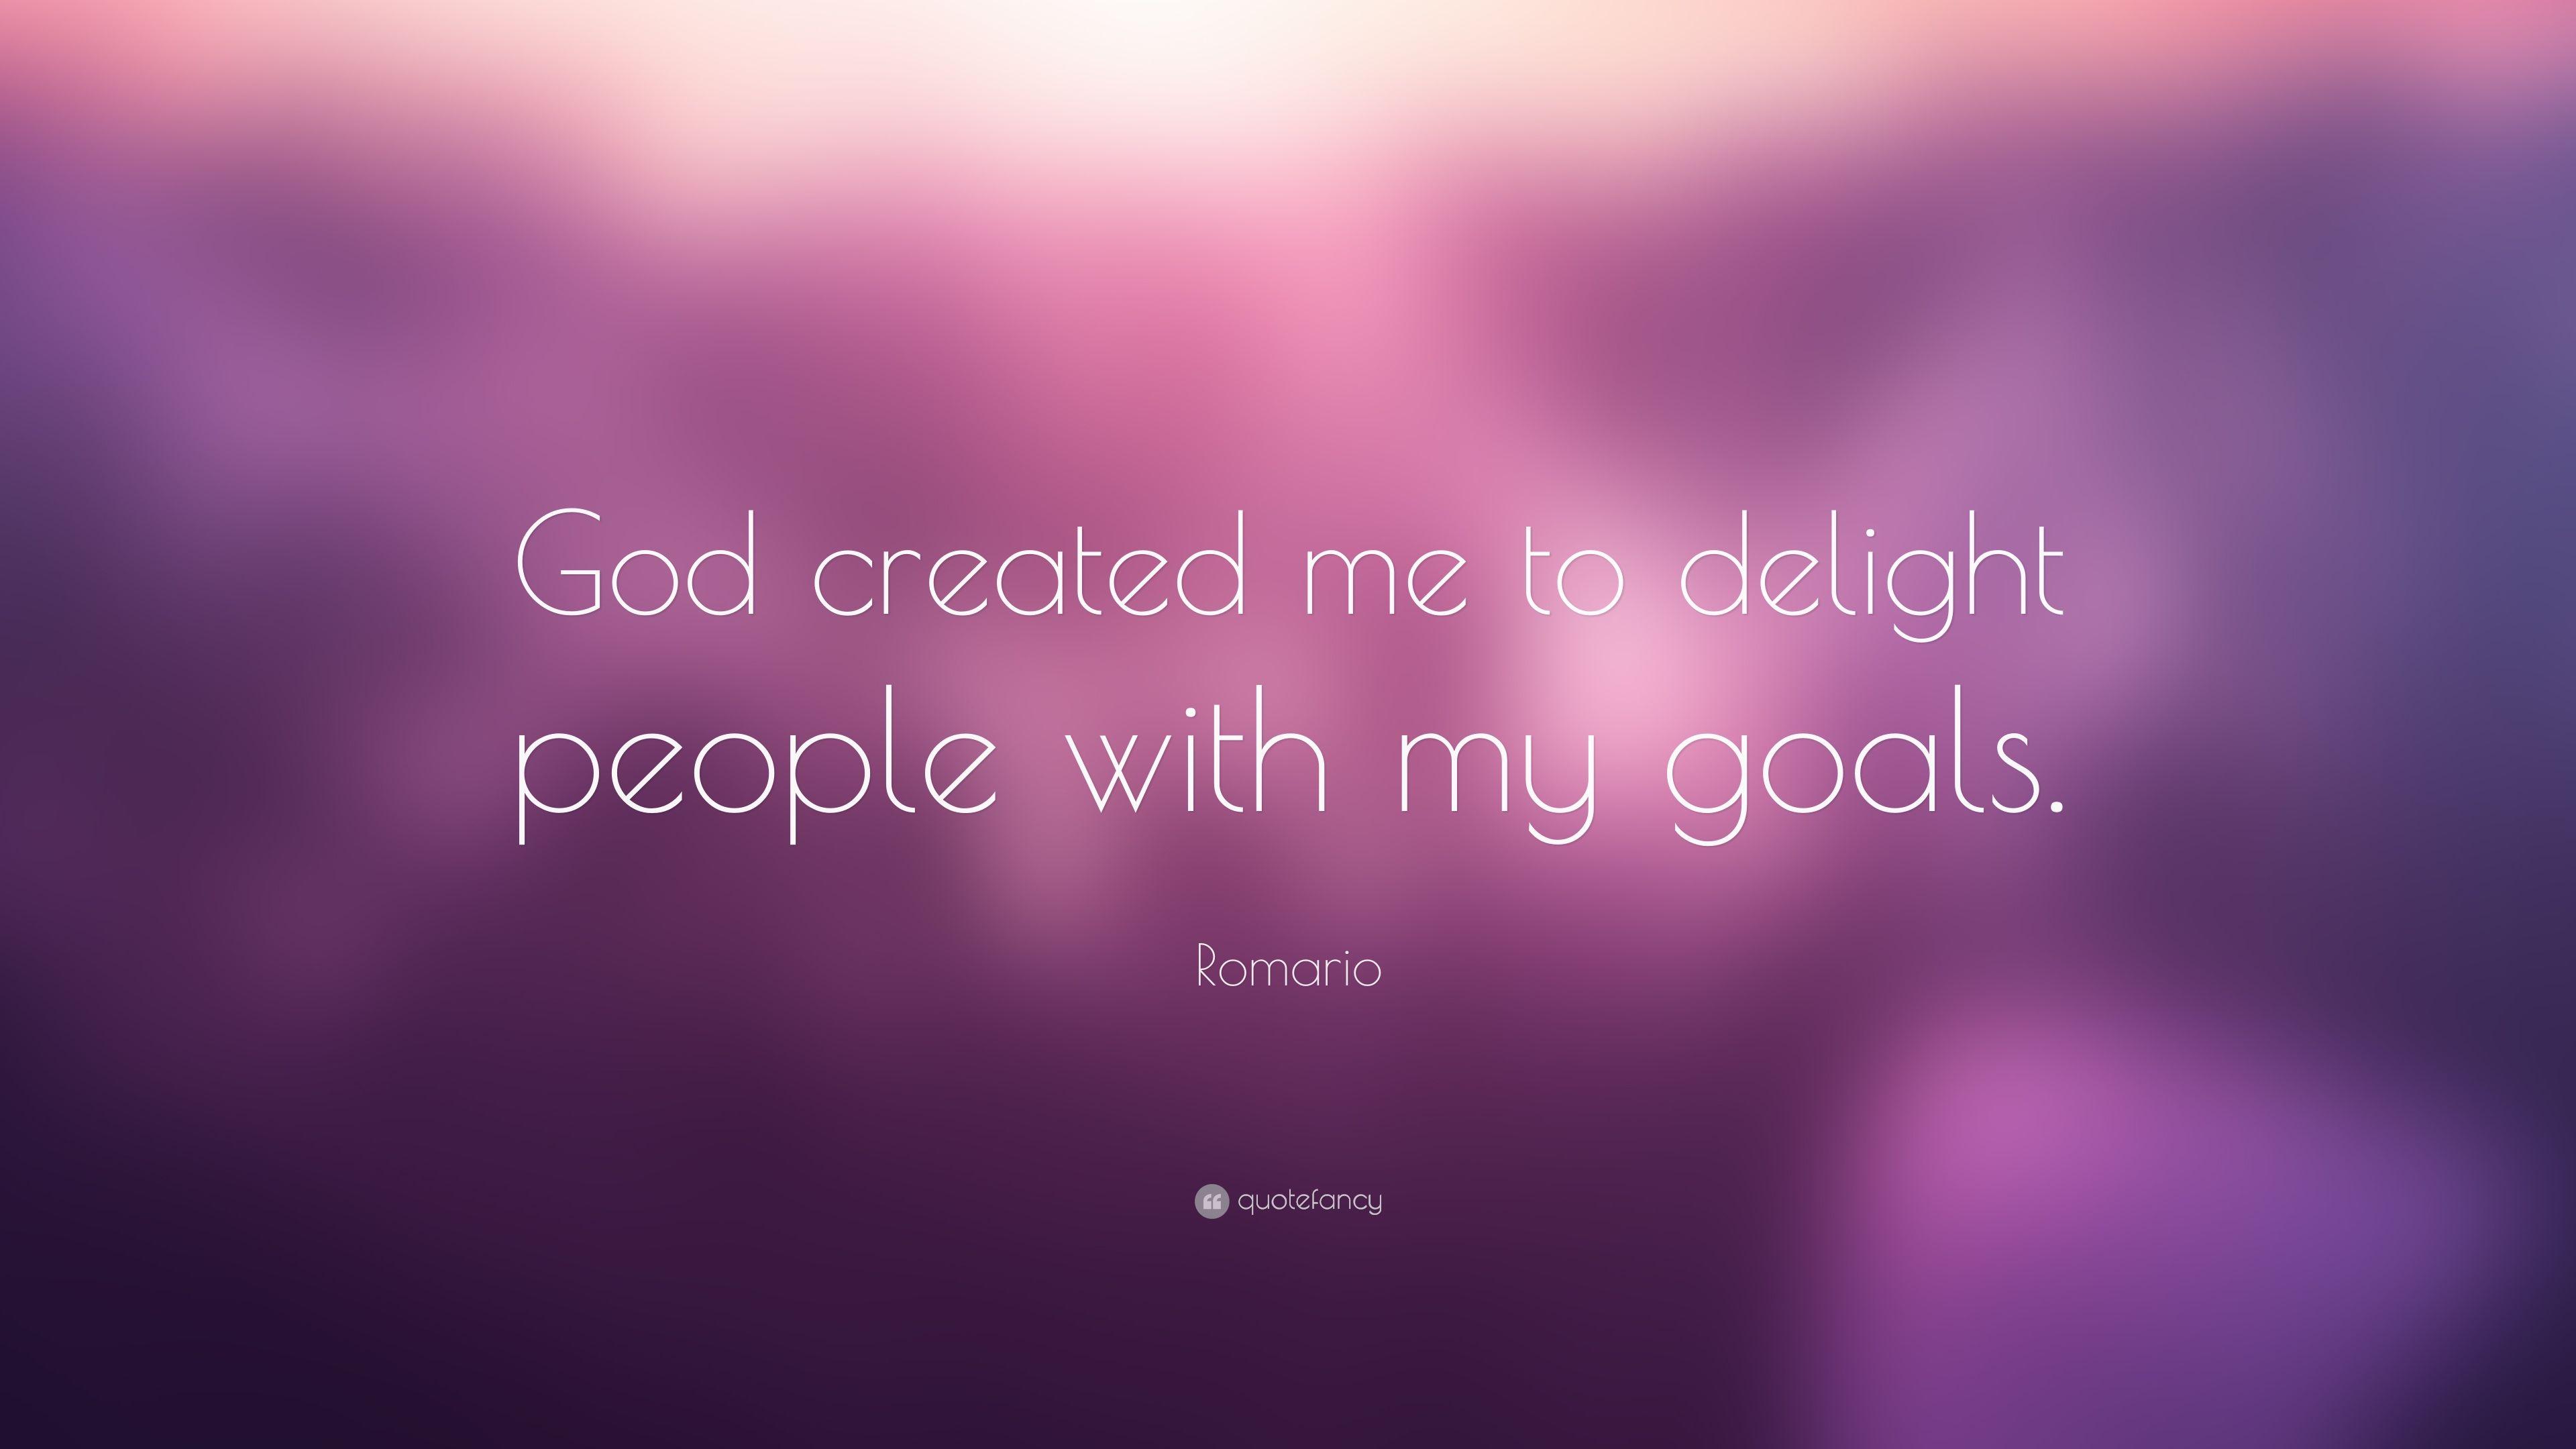 Romario Quote: “God created me to delight people with my goals.” 10